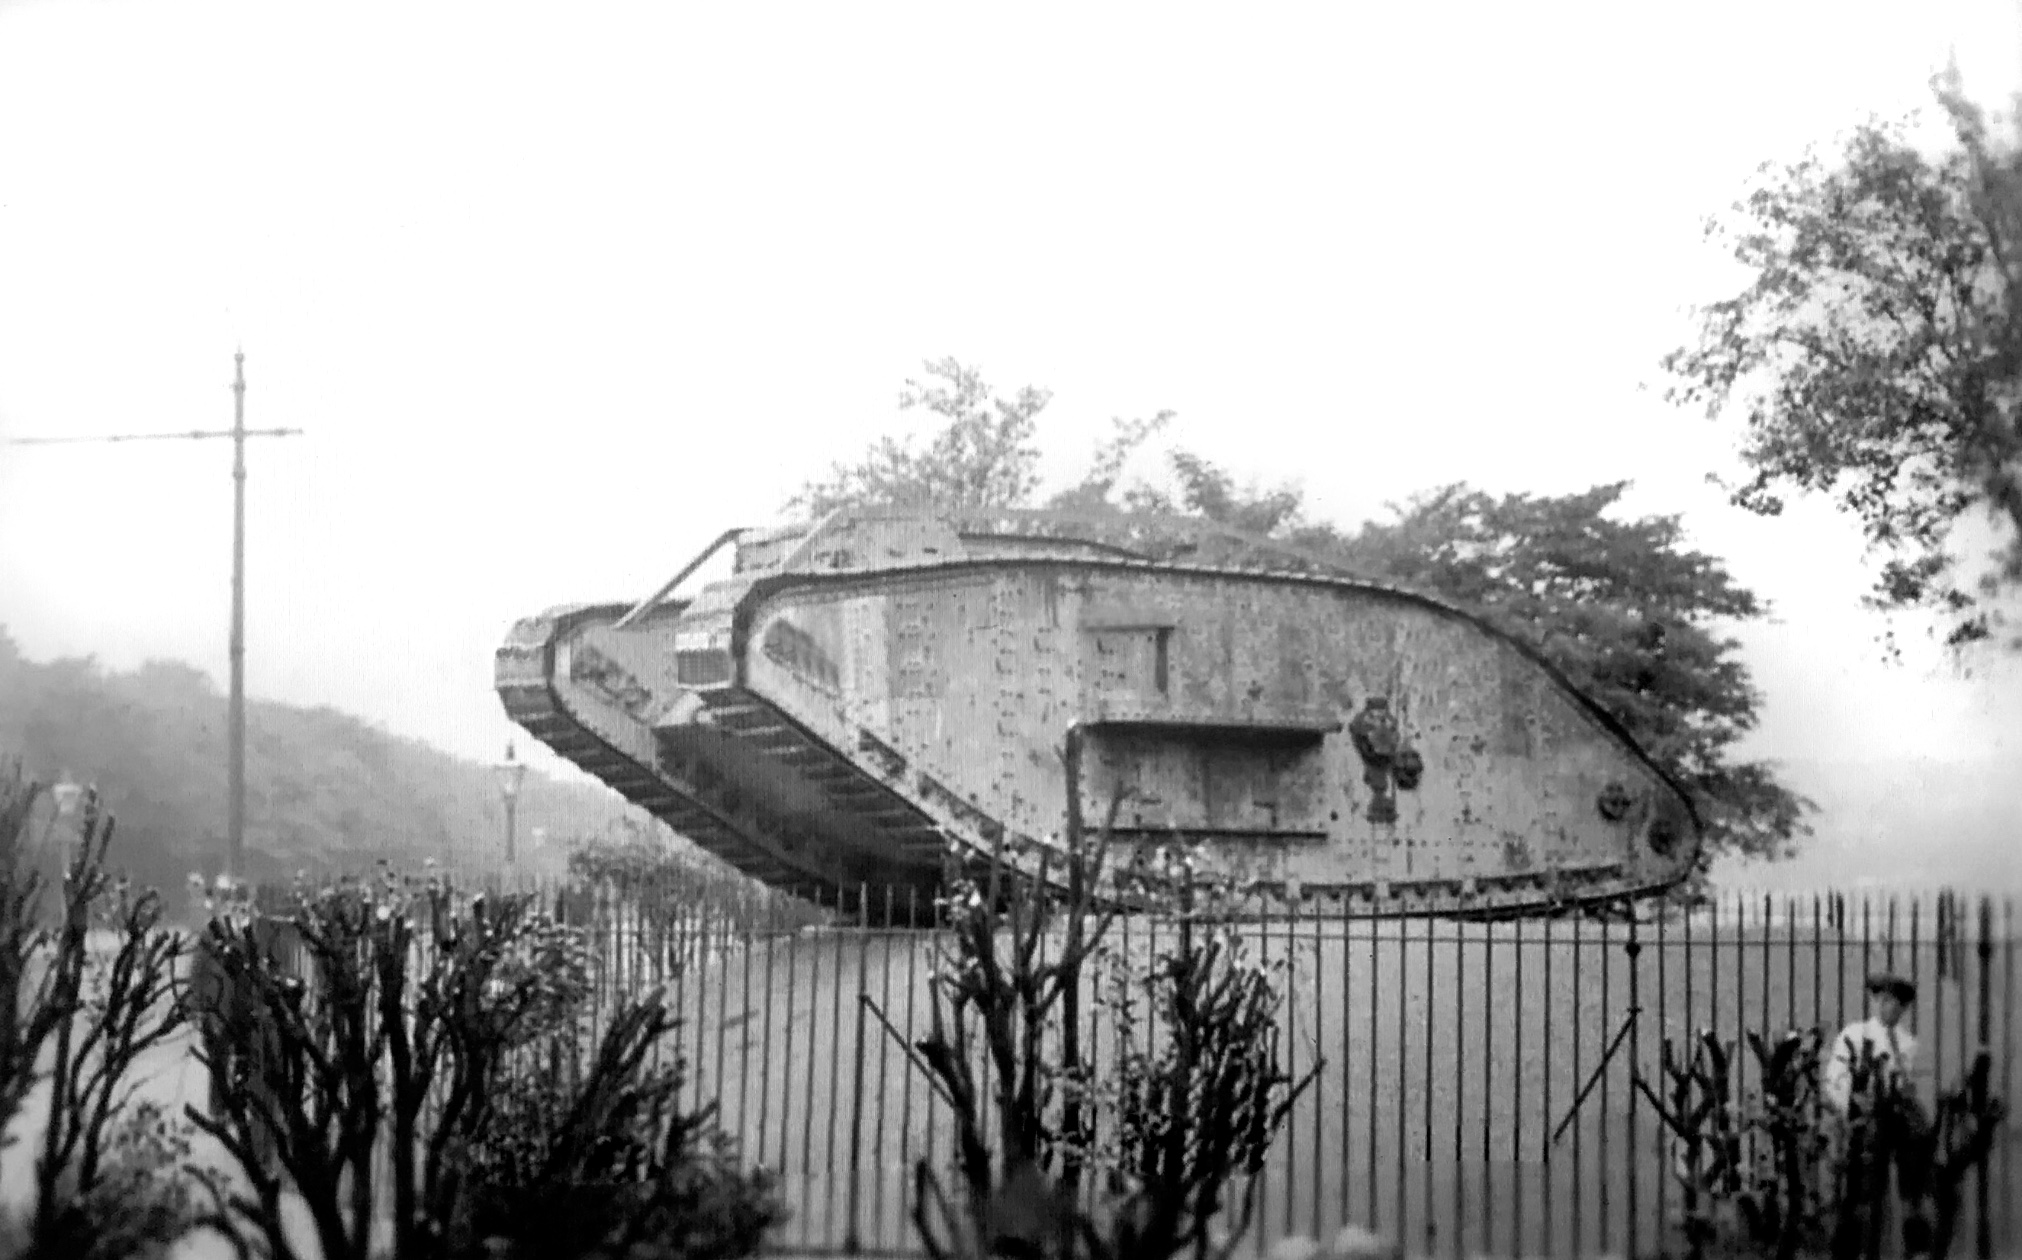 Tank from World War I, placed on Monument Moor in 1919, undated 